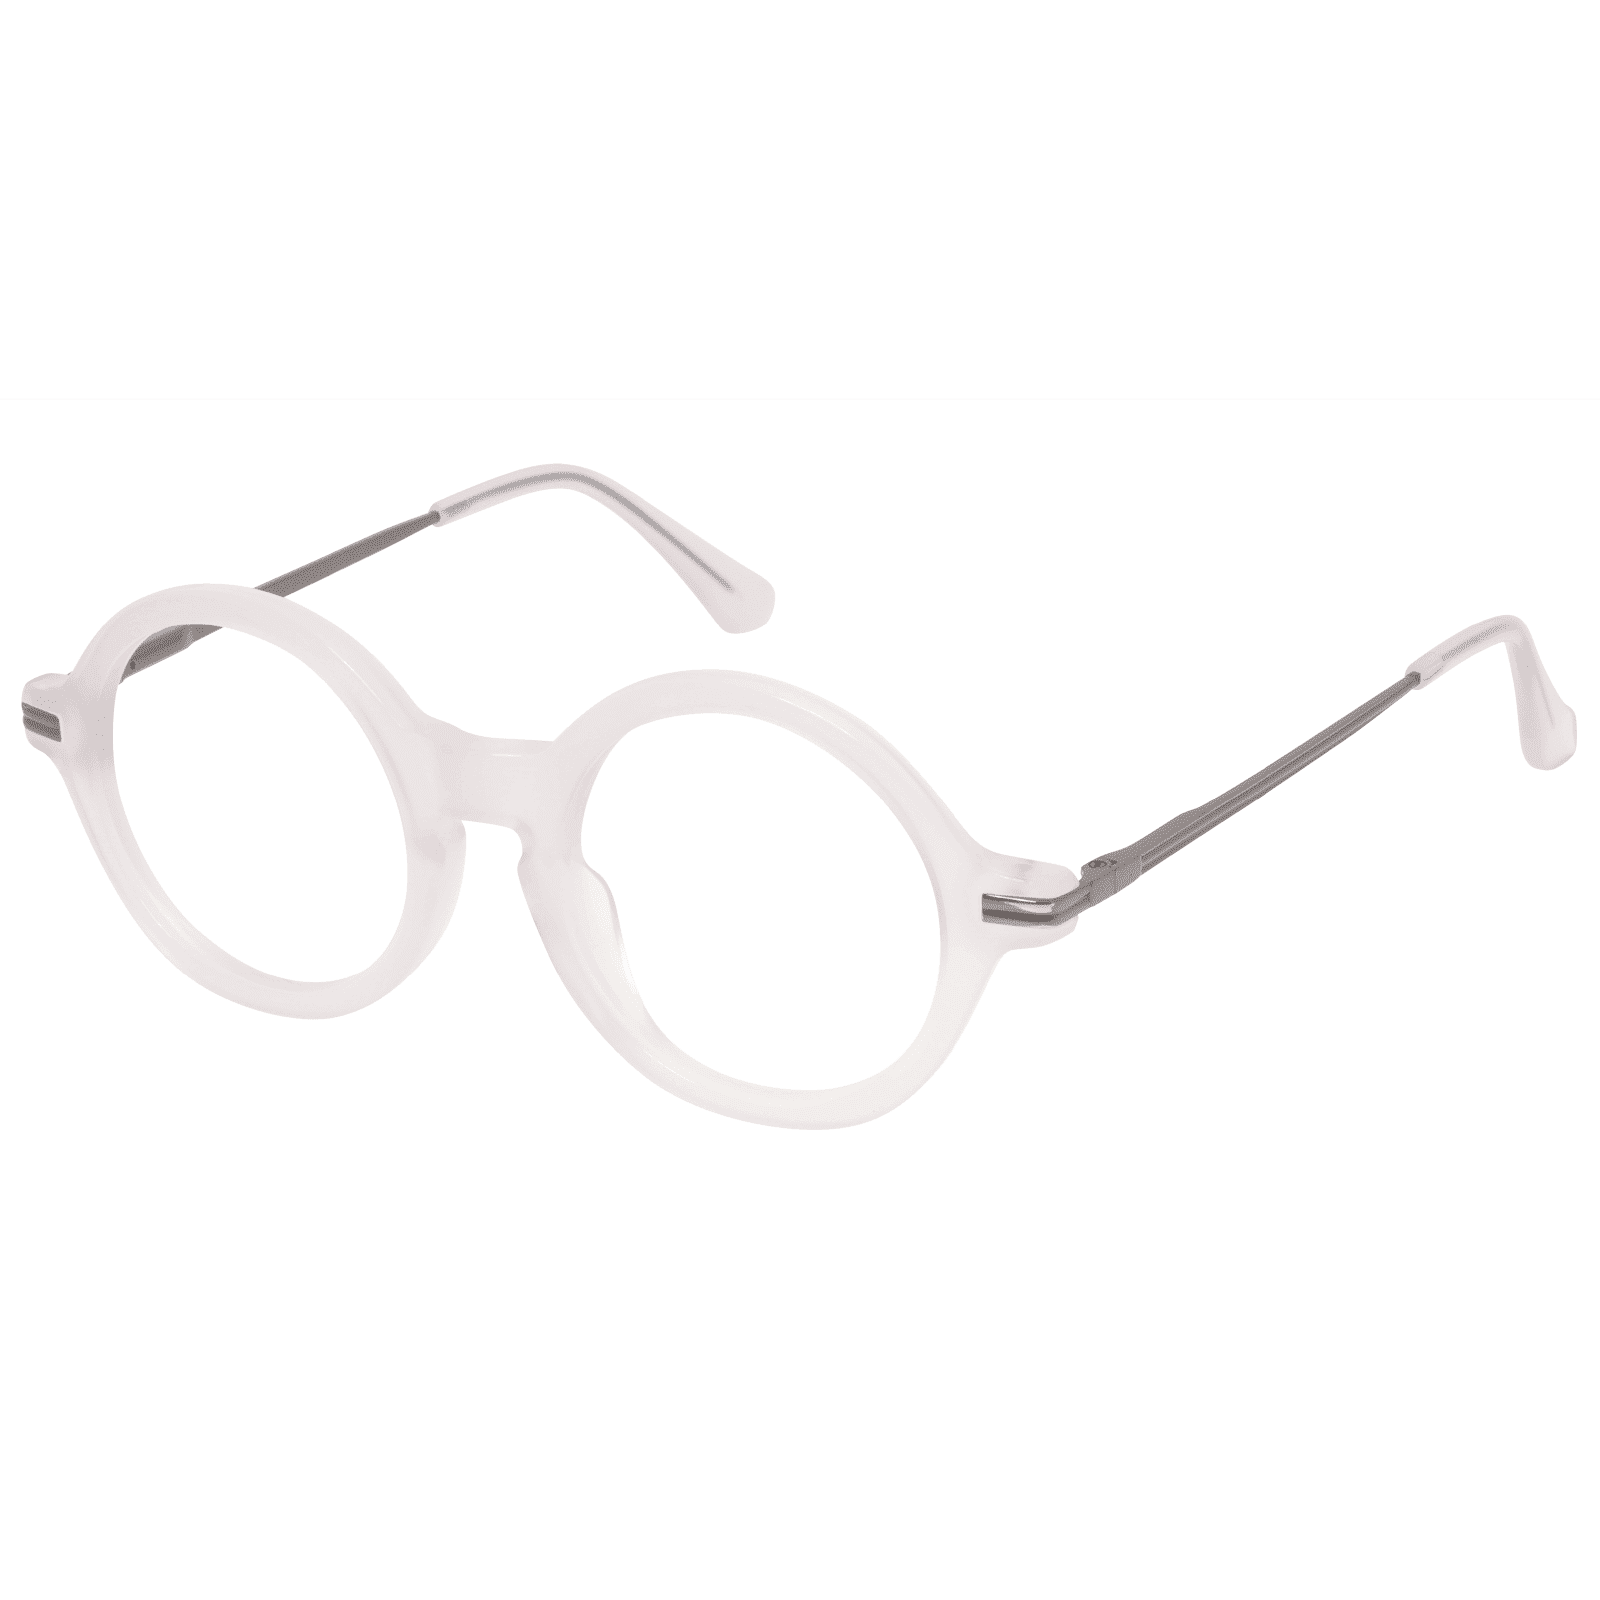 Glaucus - Round Pearl Reading Glasses for Men & Women